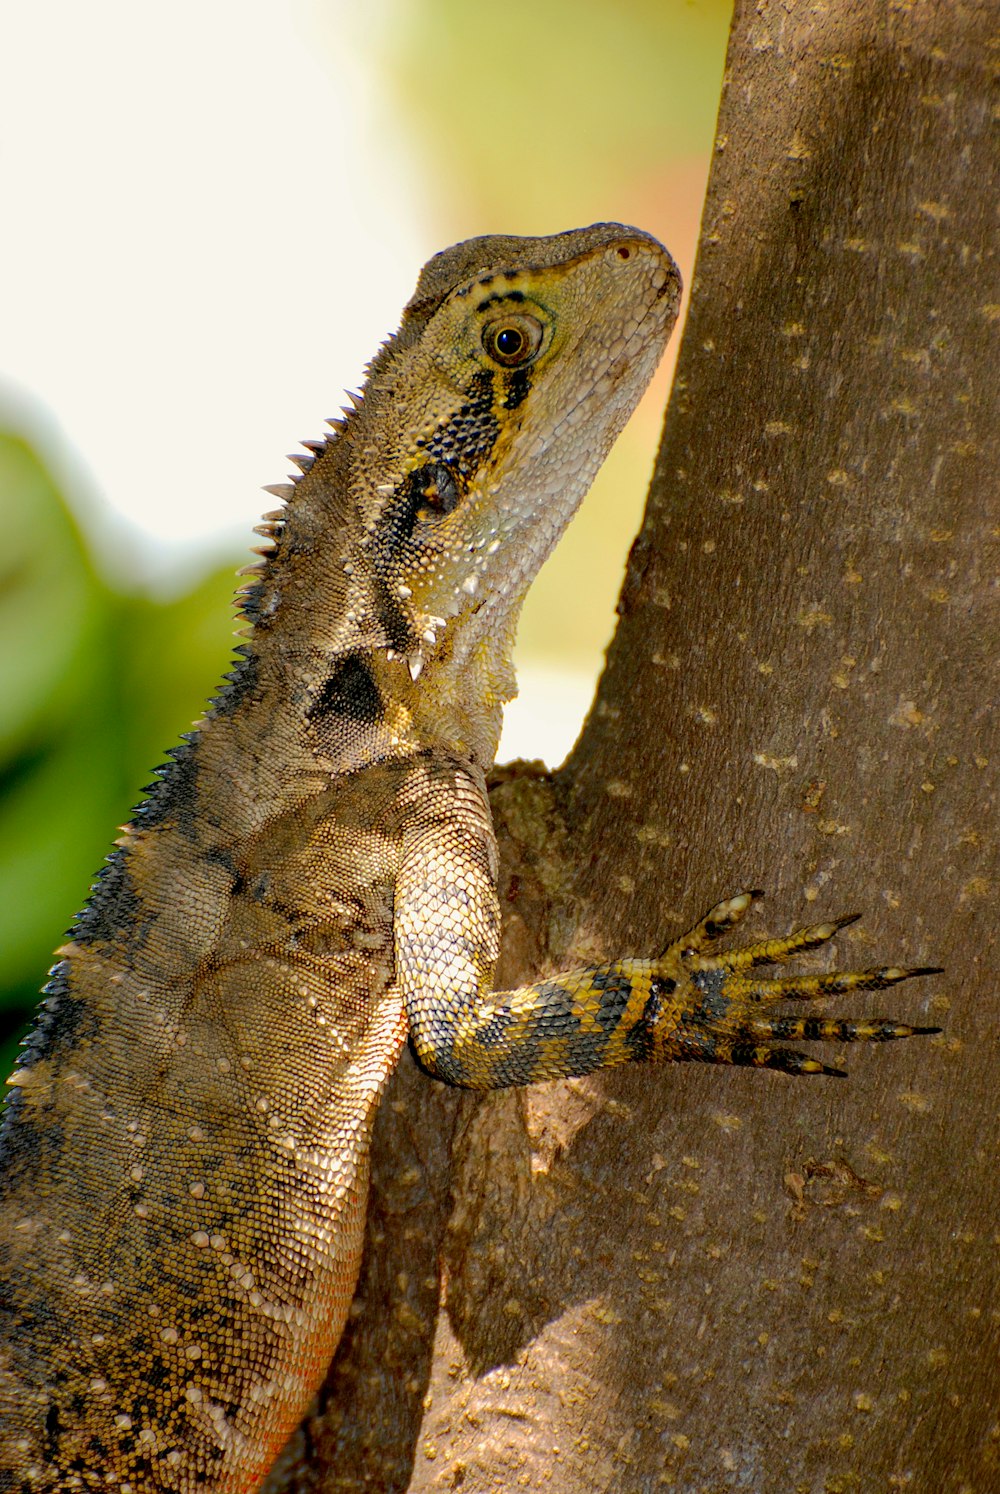 brown and gray reptile on tree